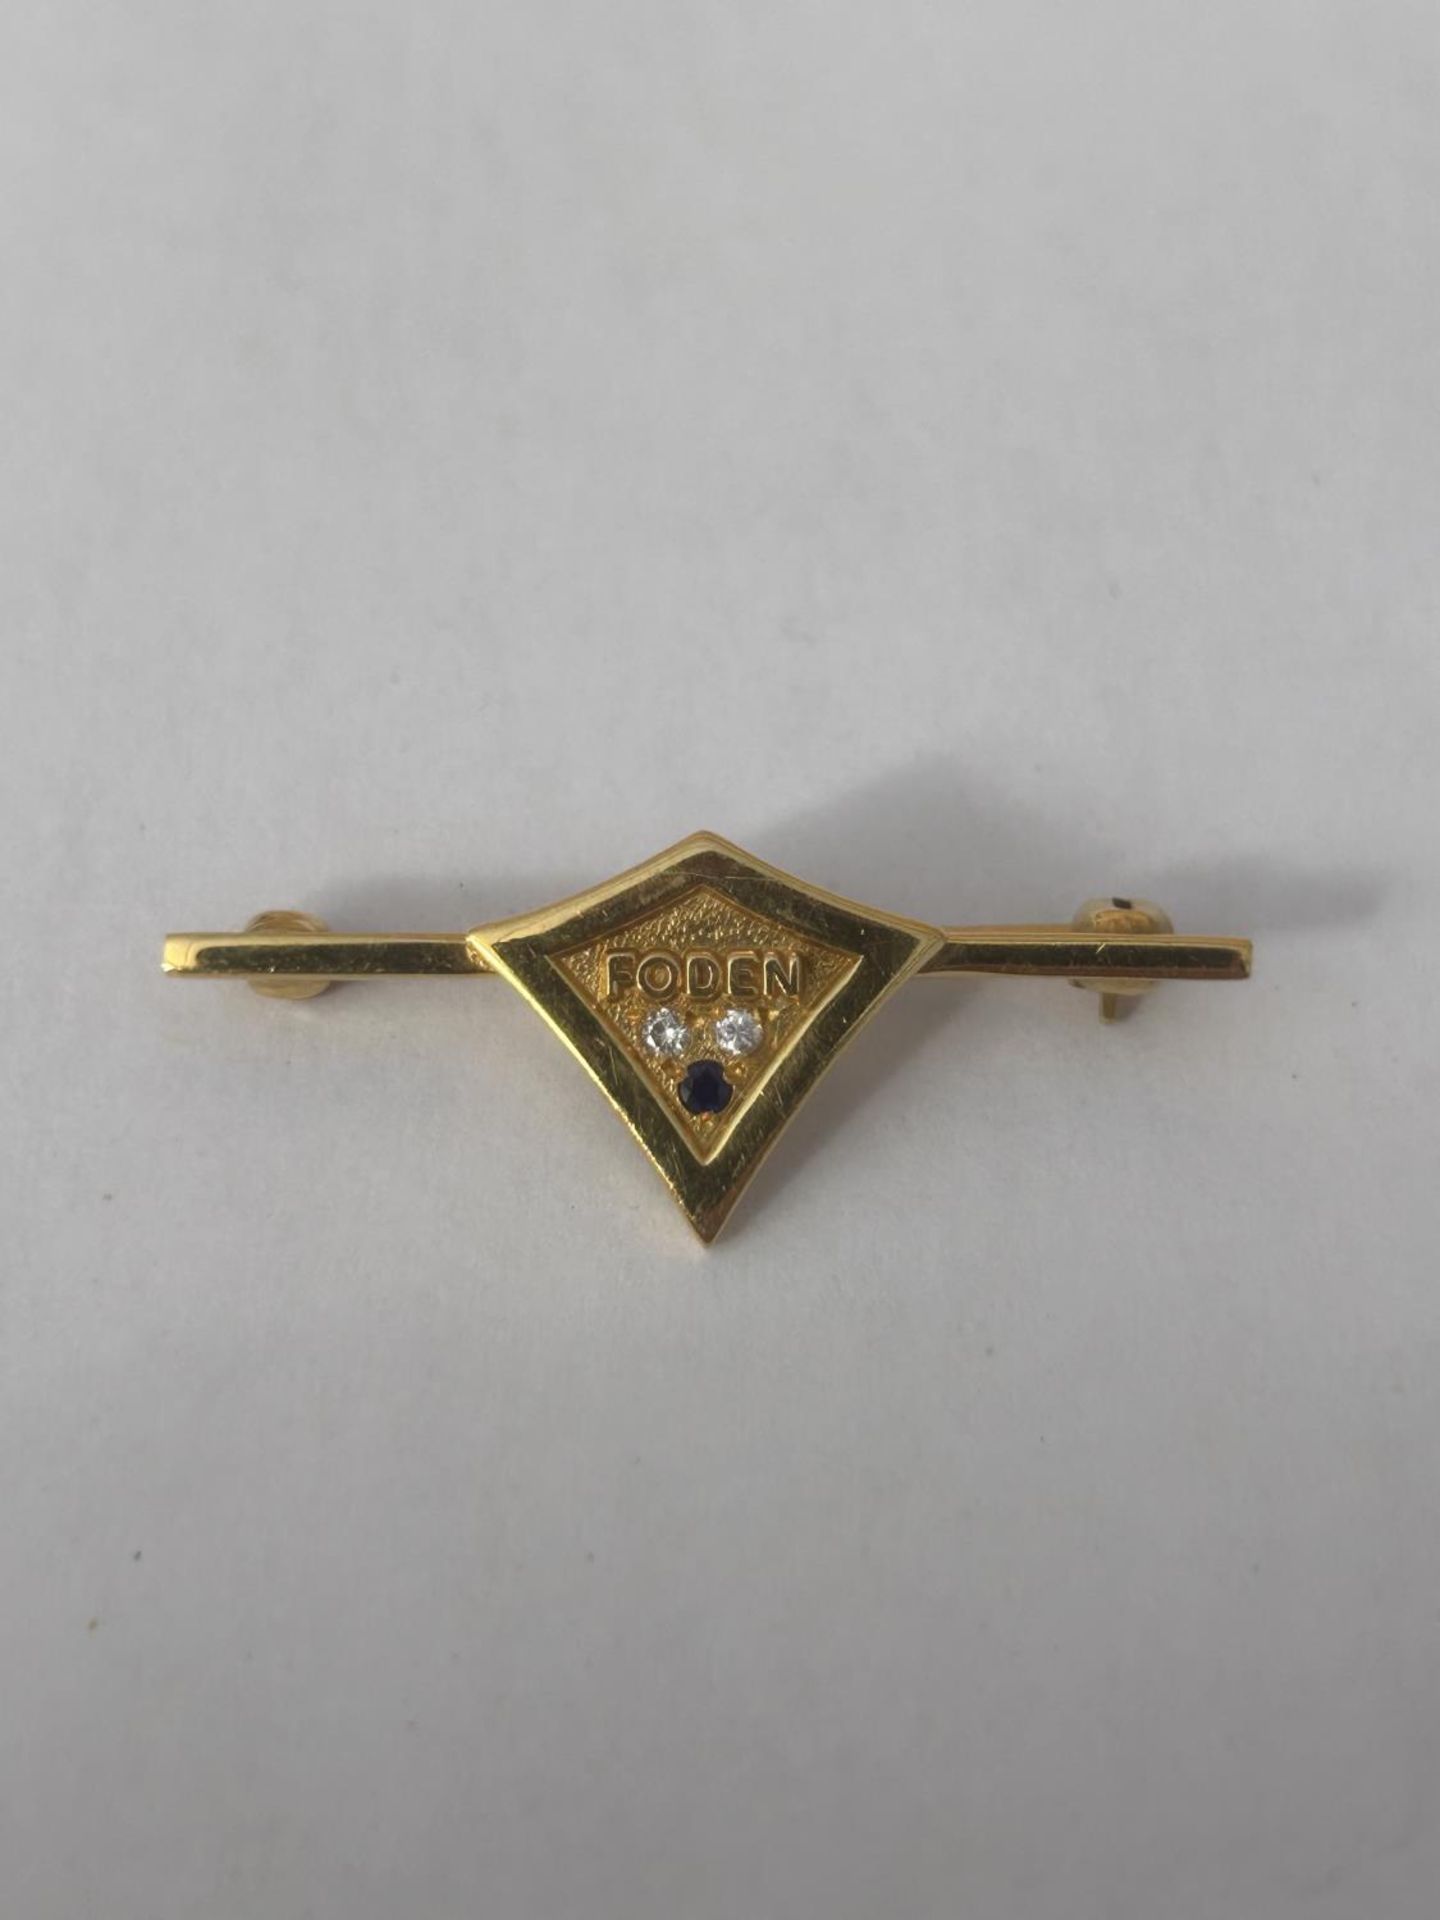 A HALLMARKED 9CT GOLD DIAMOND AND SAPPHIRE FODEN TRUCKS LAPEL BADGE WEIGHT 3.37 G